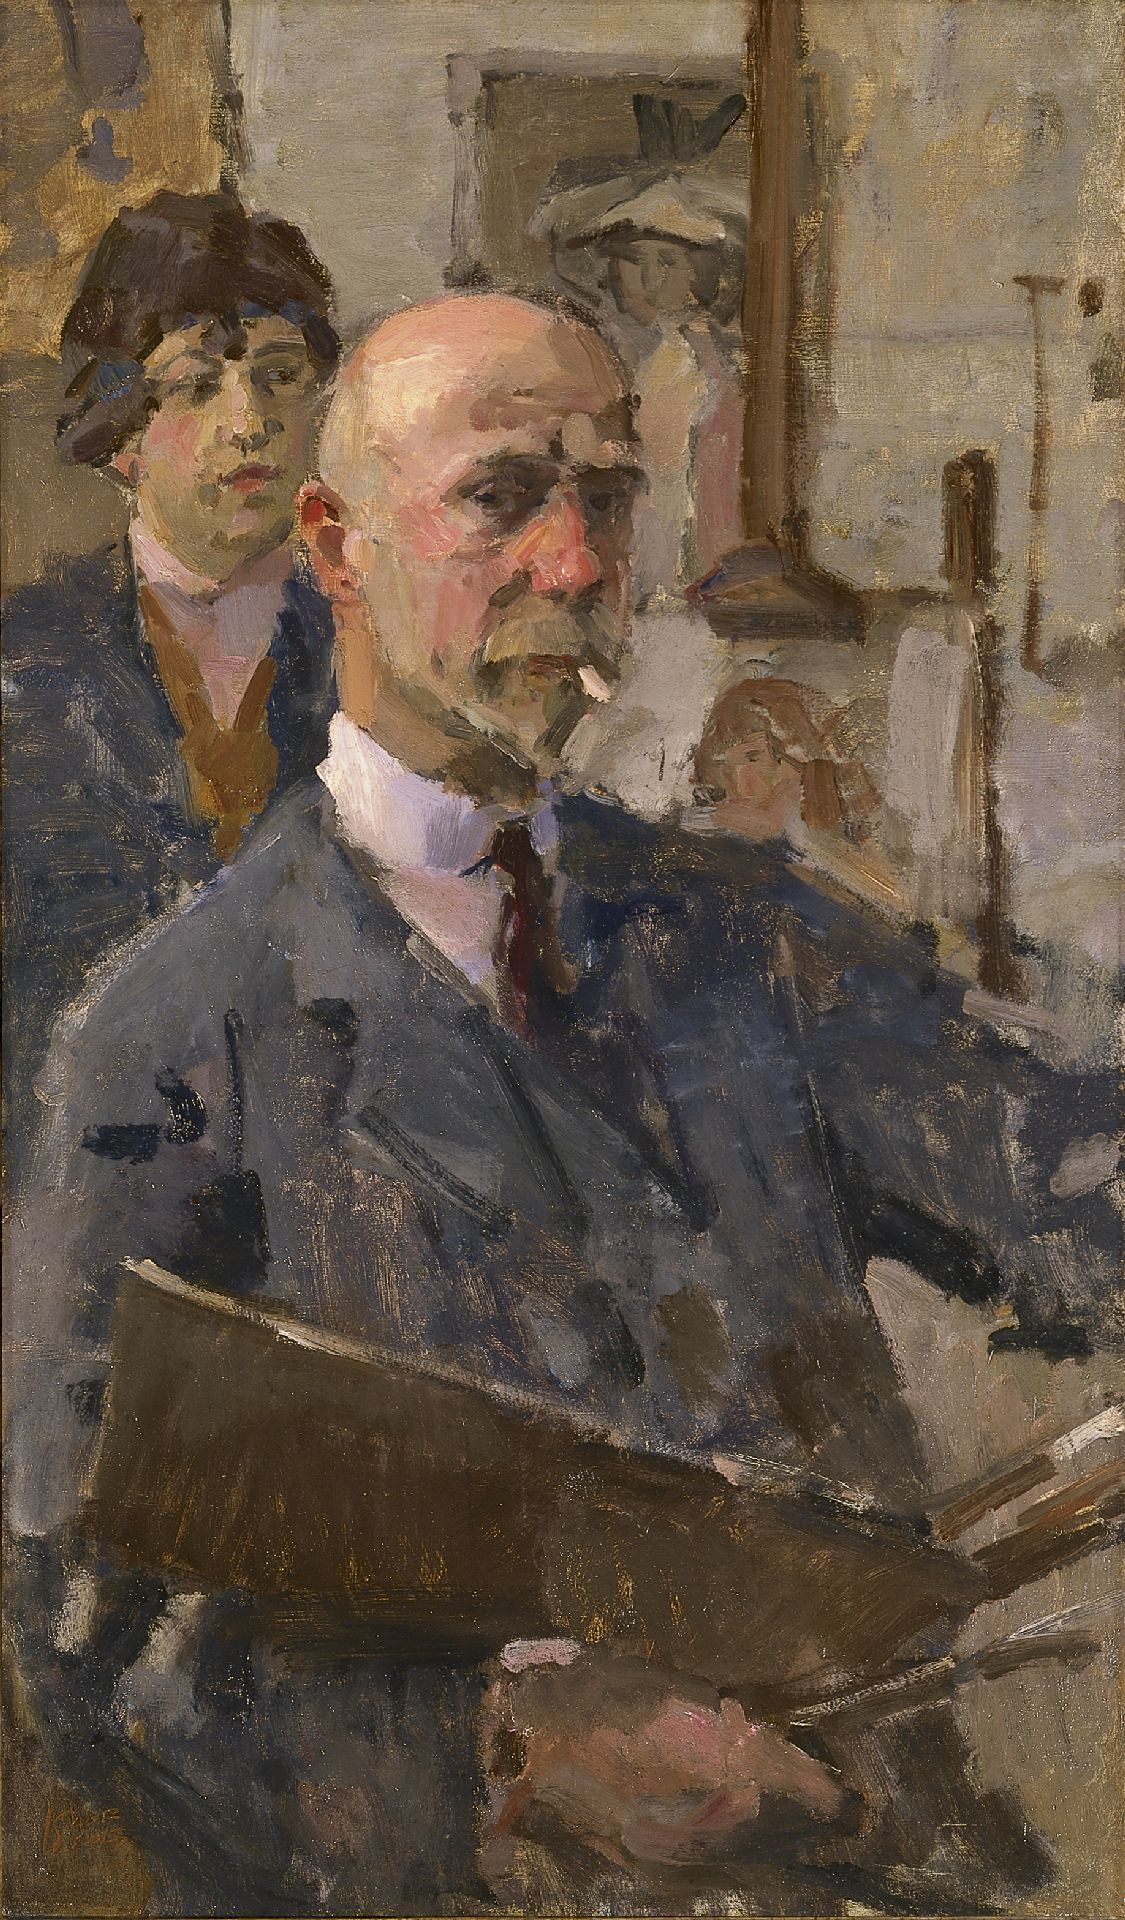 Isaac Israels | Paintings prev. for Sale | Self-portrait with model in studio